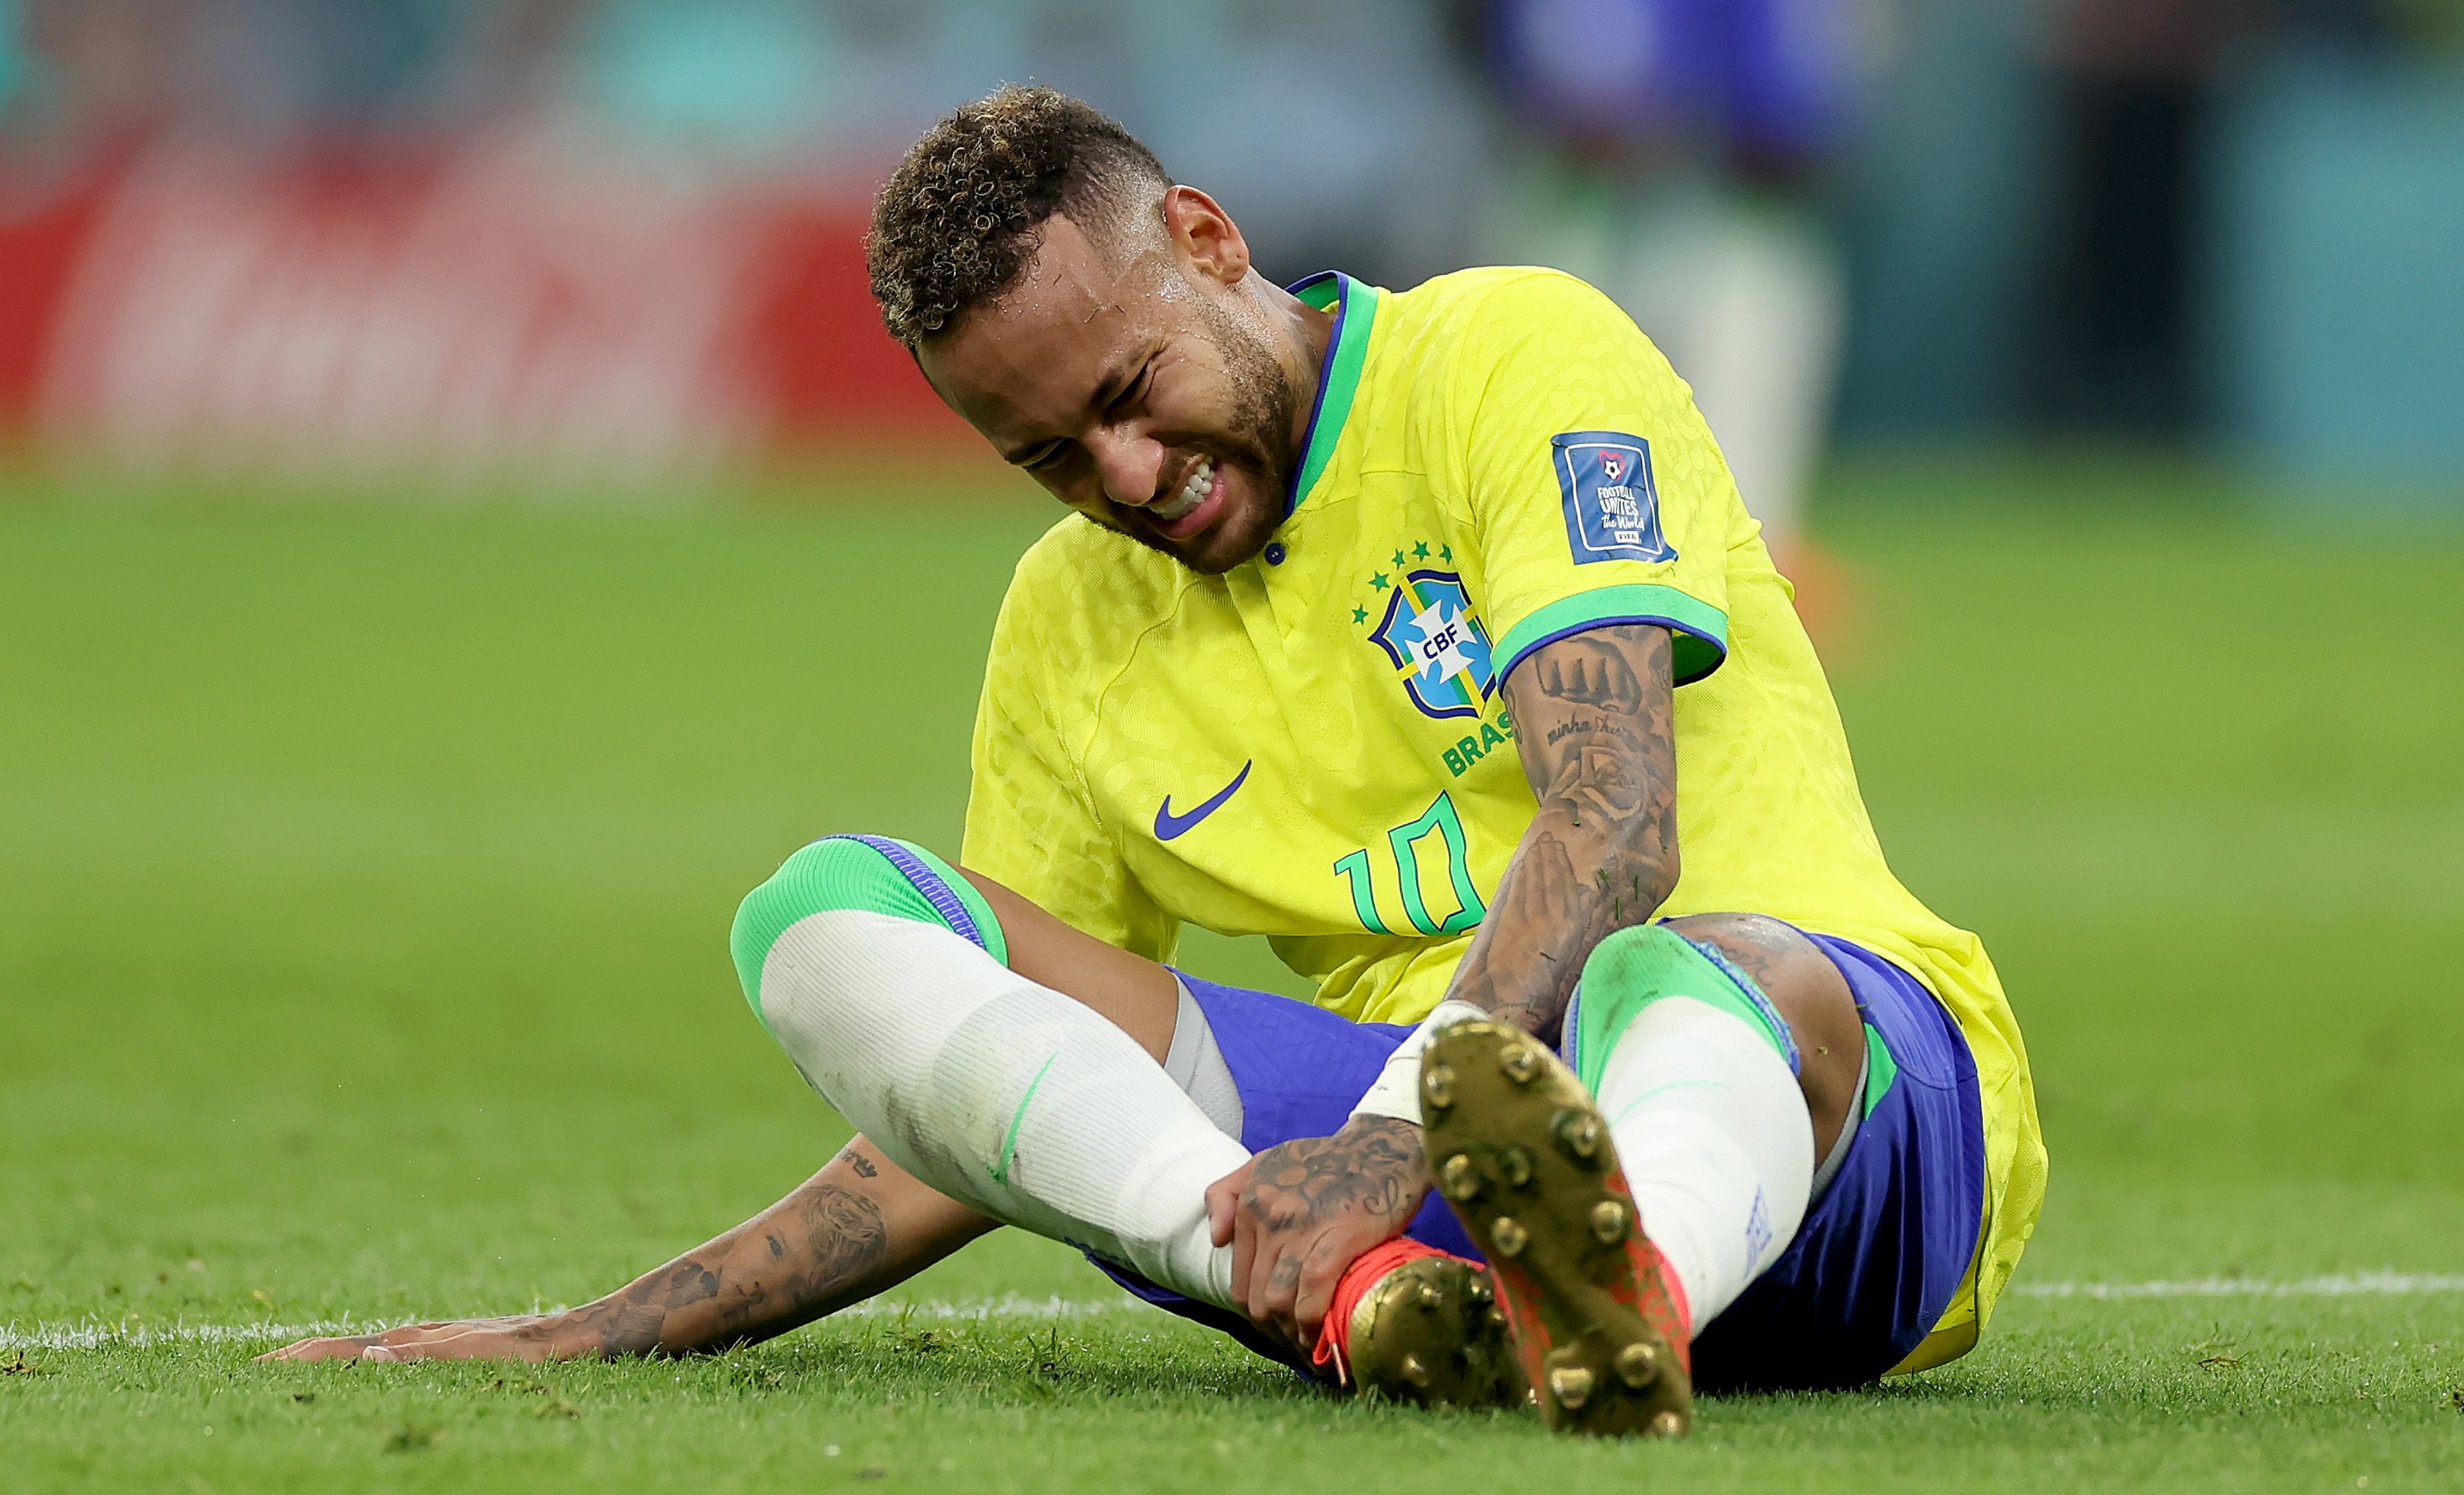 Neymar could miss most of the 2022 World Cup